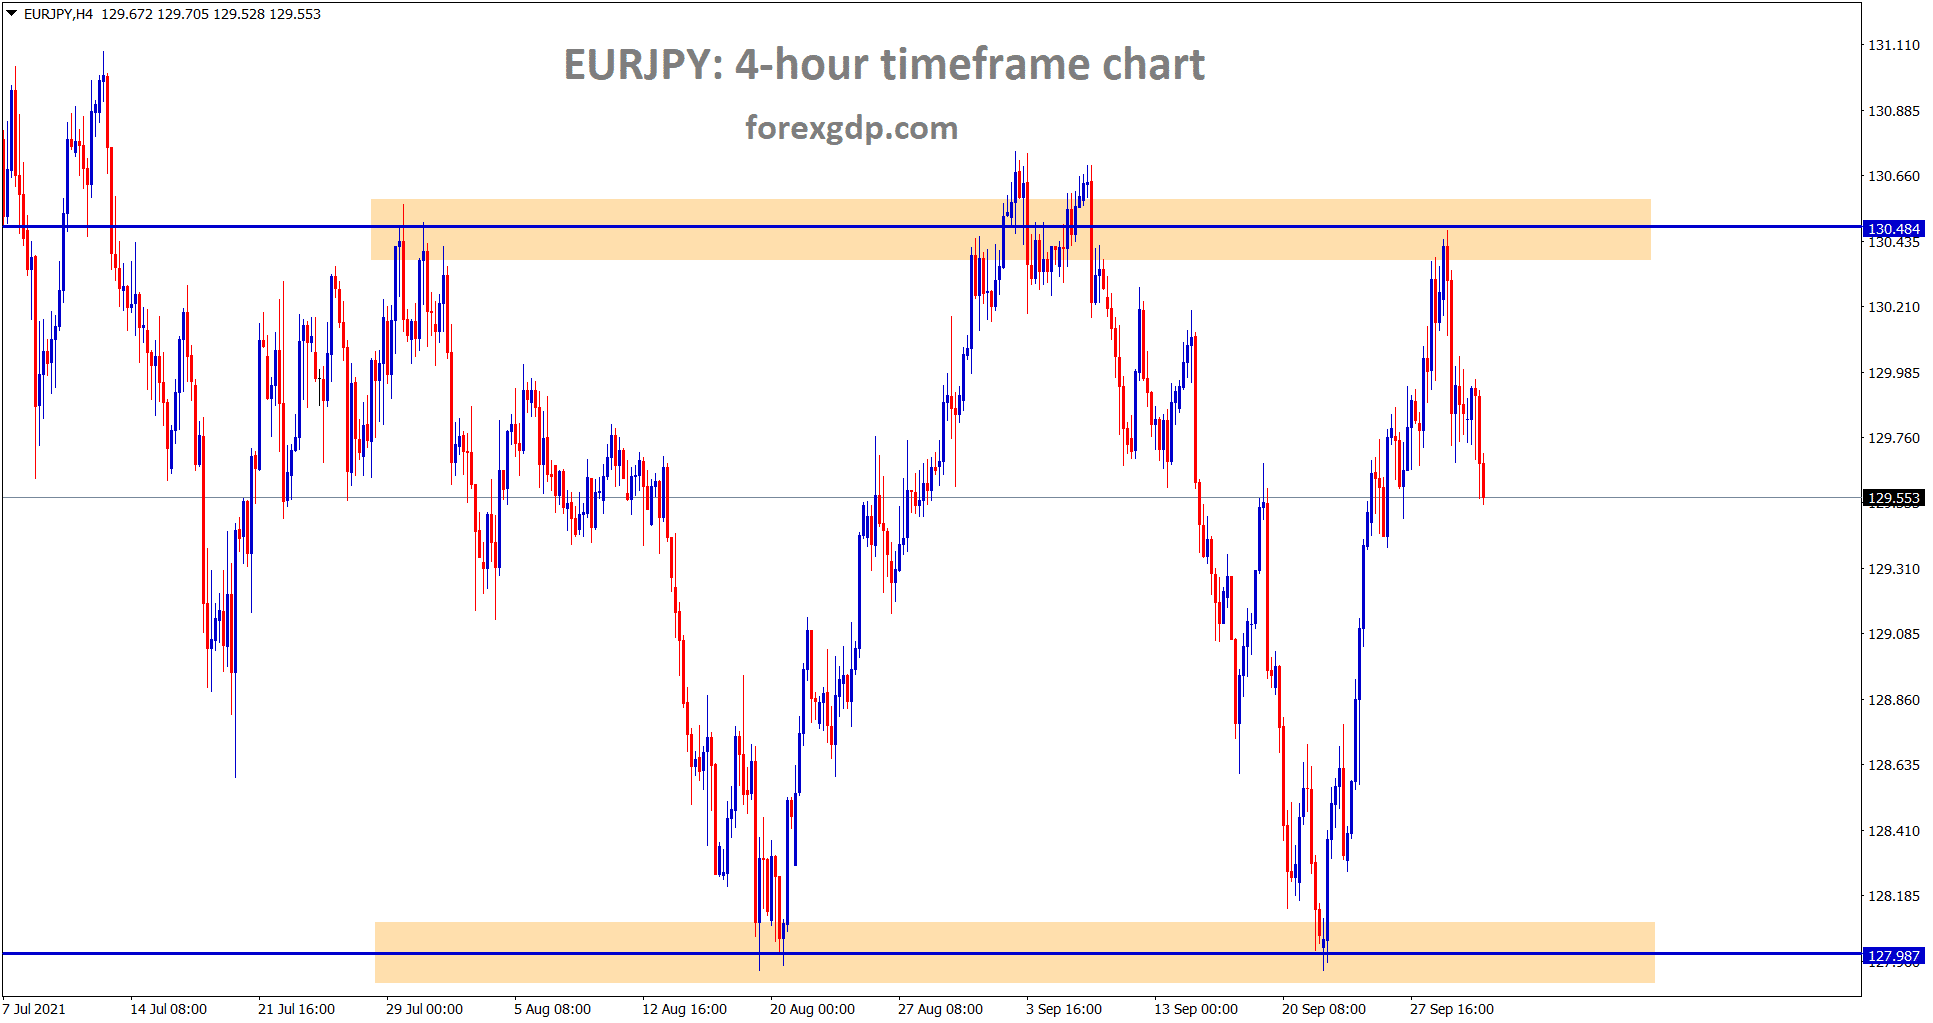 EURJPY is falling from the resistance for a correction